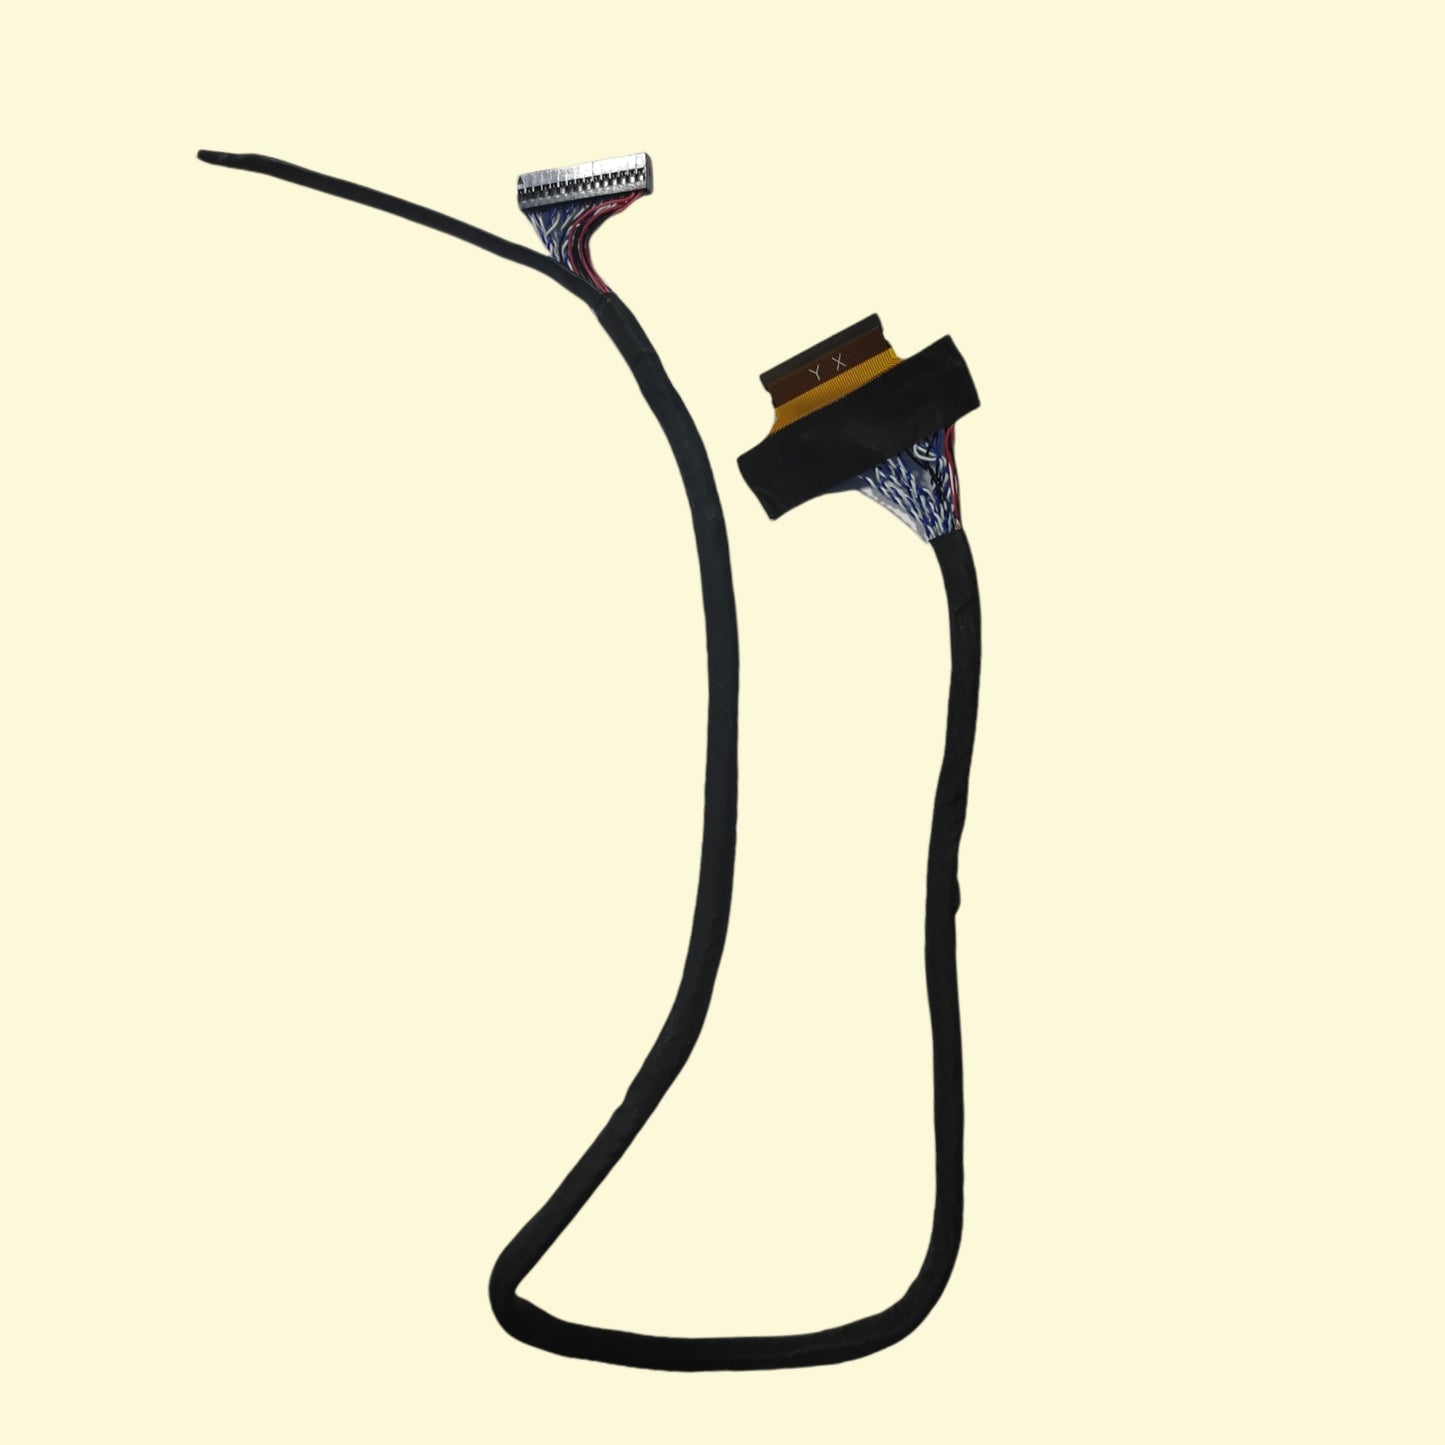 LVDS Cable 09 - Faritha